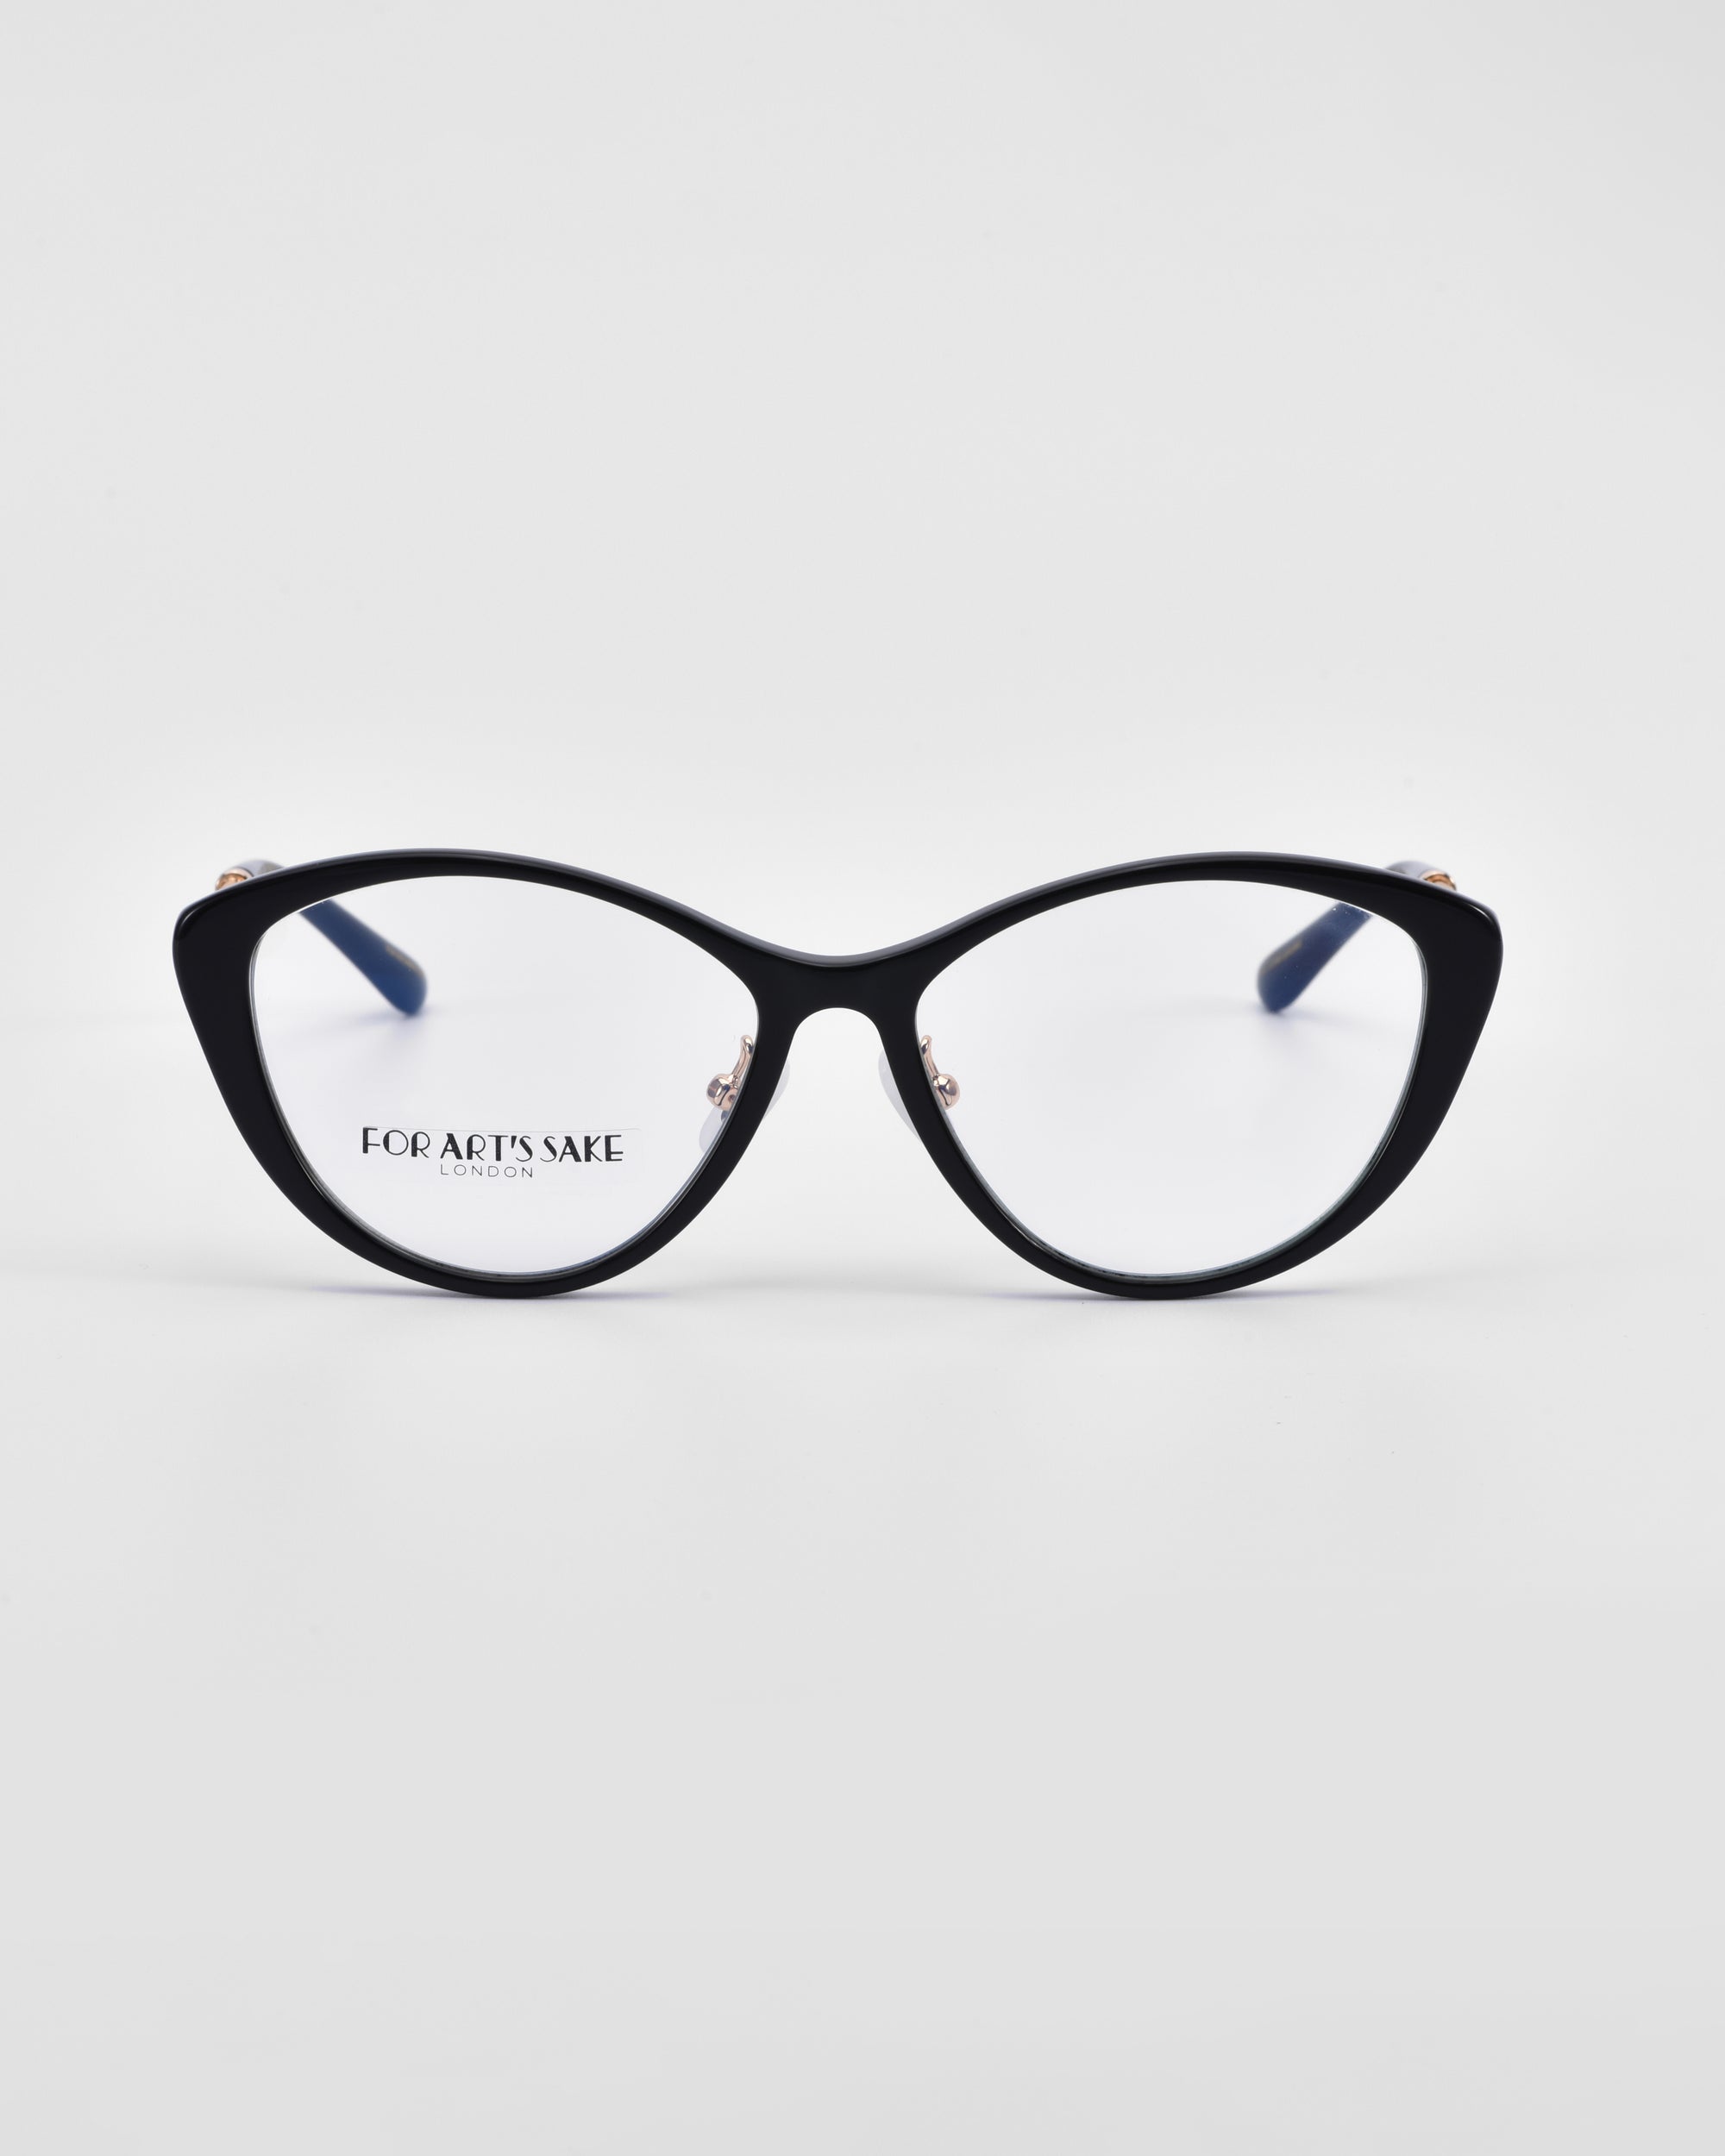 A pair of black cat-eye glasses with clear lenses is shown against a white background. The glasses feature jade-stone nose pads and an 18-karat gold plating, boasting a sleek and modern design with &quot;For Art&#39;s Sake®&quot; branding visible on the inside of one lens.